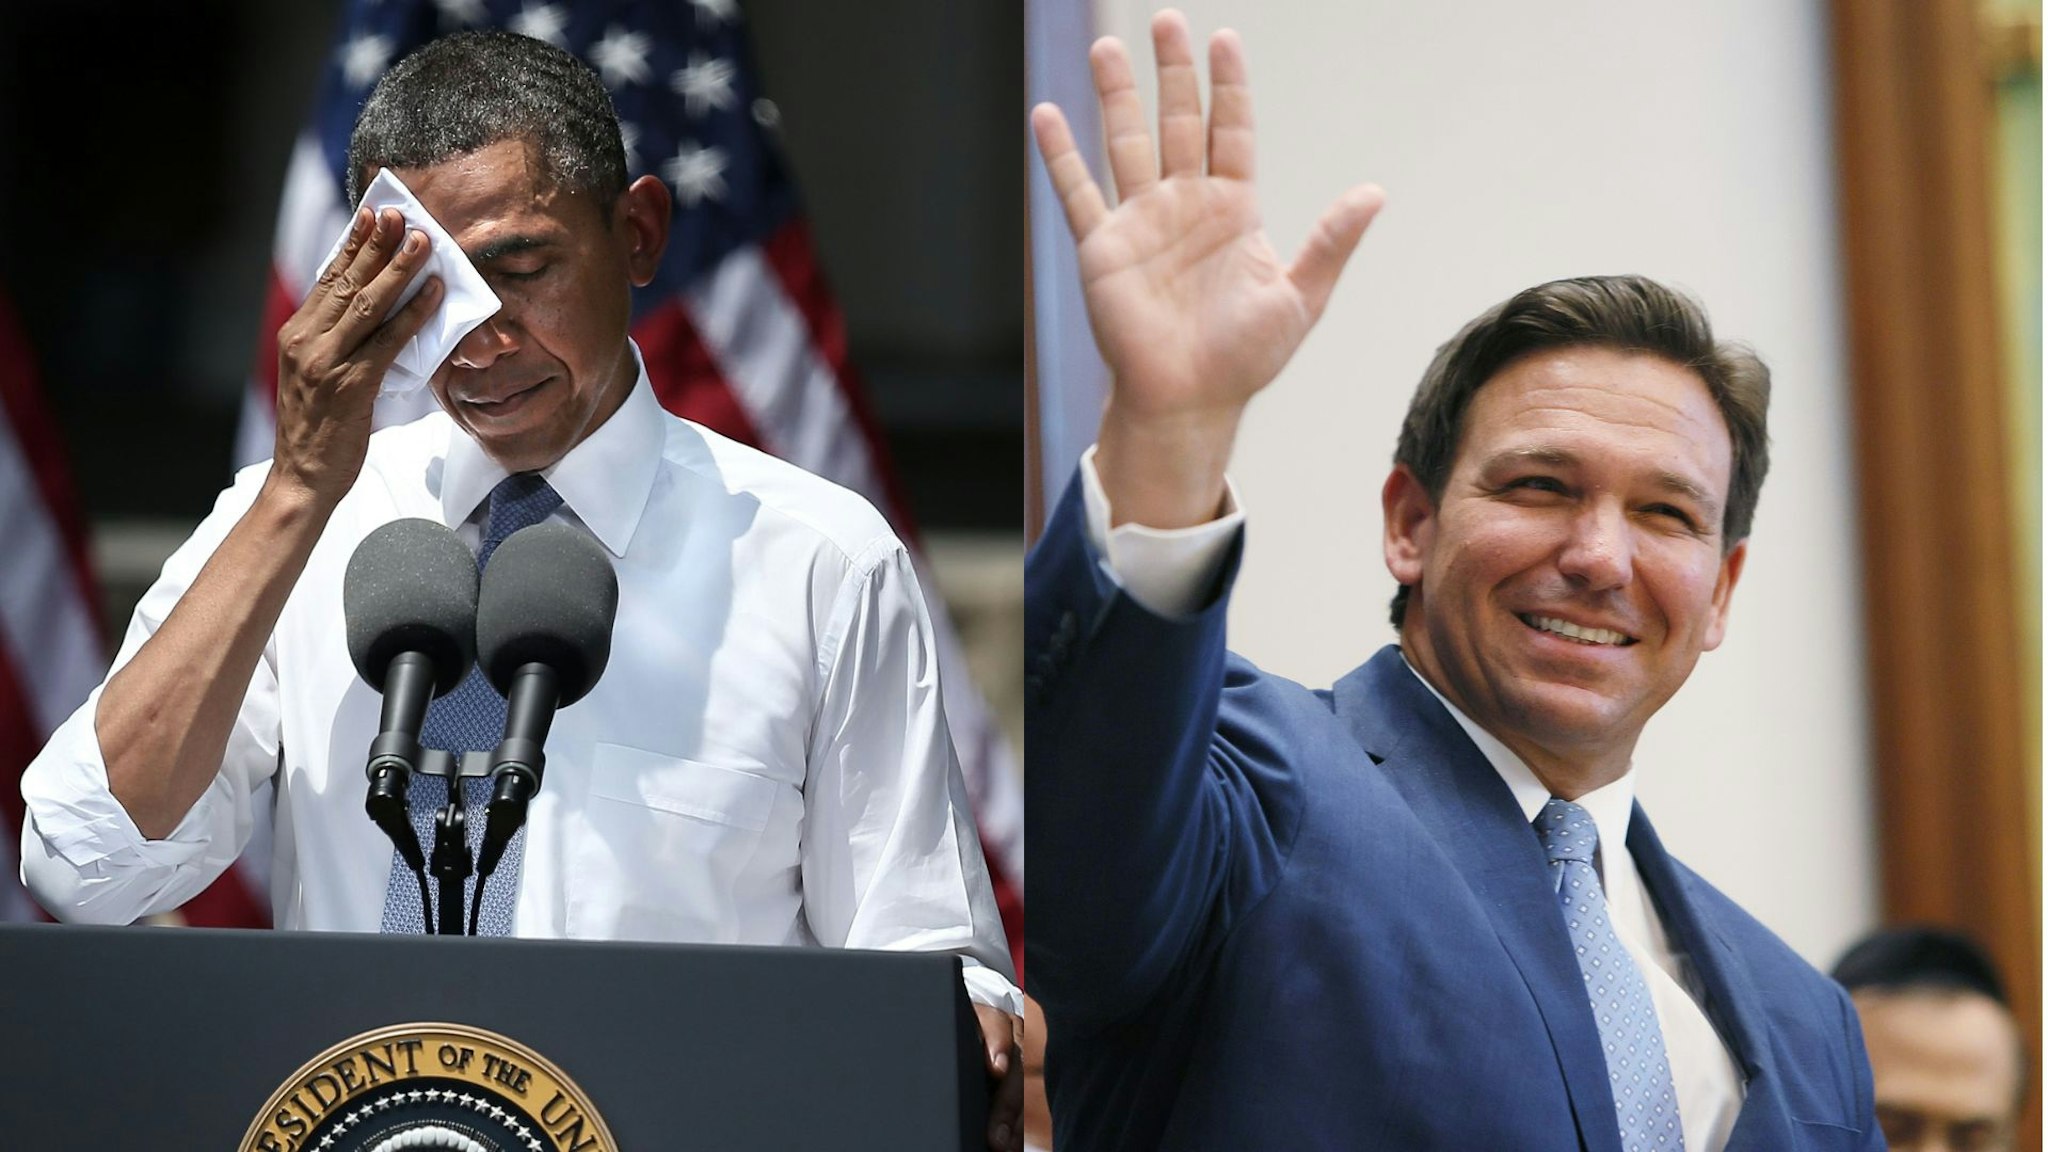 SURFSIDE, FLORIDA - JUNE 14: Florida Gov. Ron DeSantis arrives to speak during a press conference at the Shul of Bal Harbour on June 14, 2021 in Surfside, Florida. The governor spoke about the two bills he signed HB 529 and HB 805. HB 805 ensures that volunteer ambulance services, including Hatzalah, can operate.